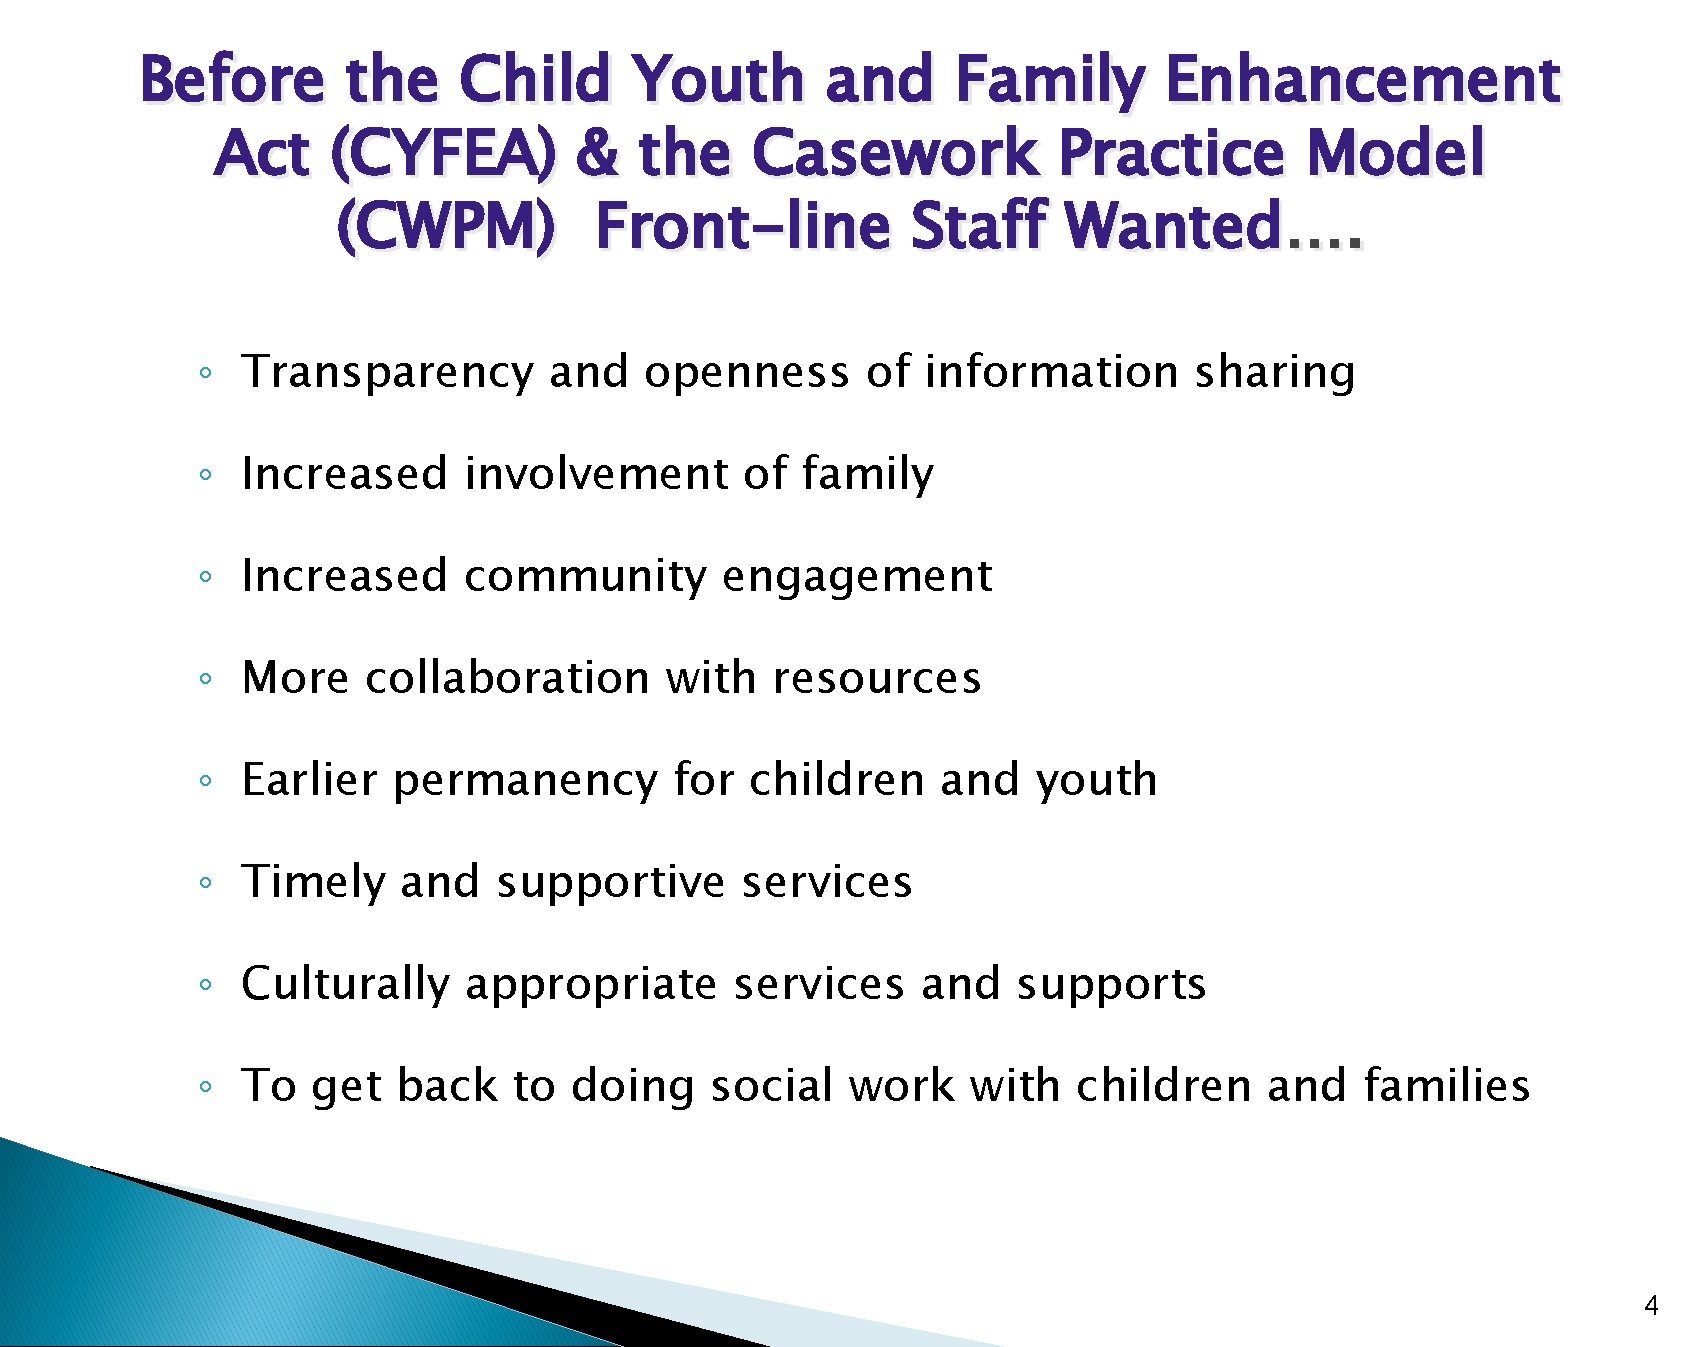 Before the Child Youth and Family Enhancement Act (CYFEA) & the Casework Practice Model